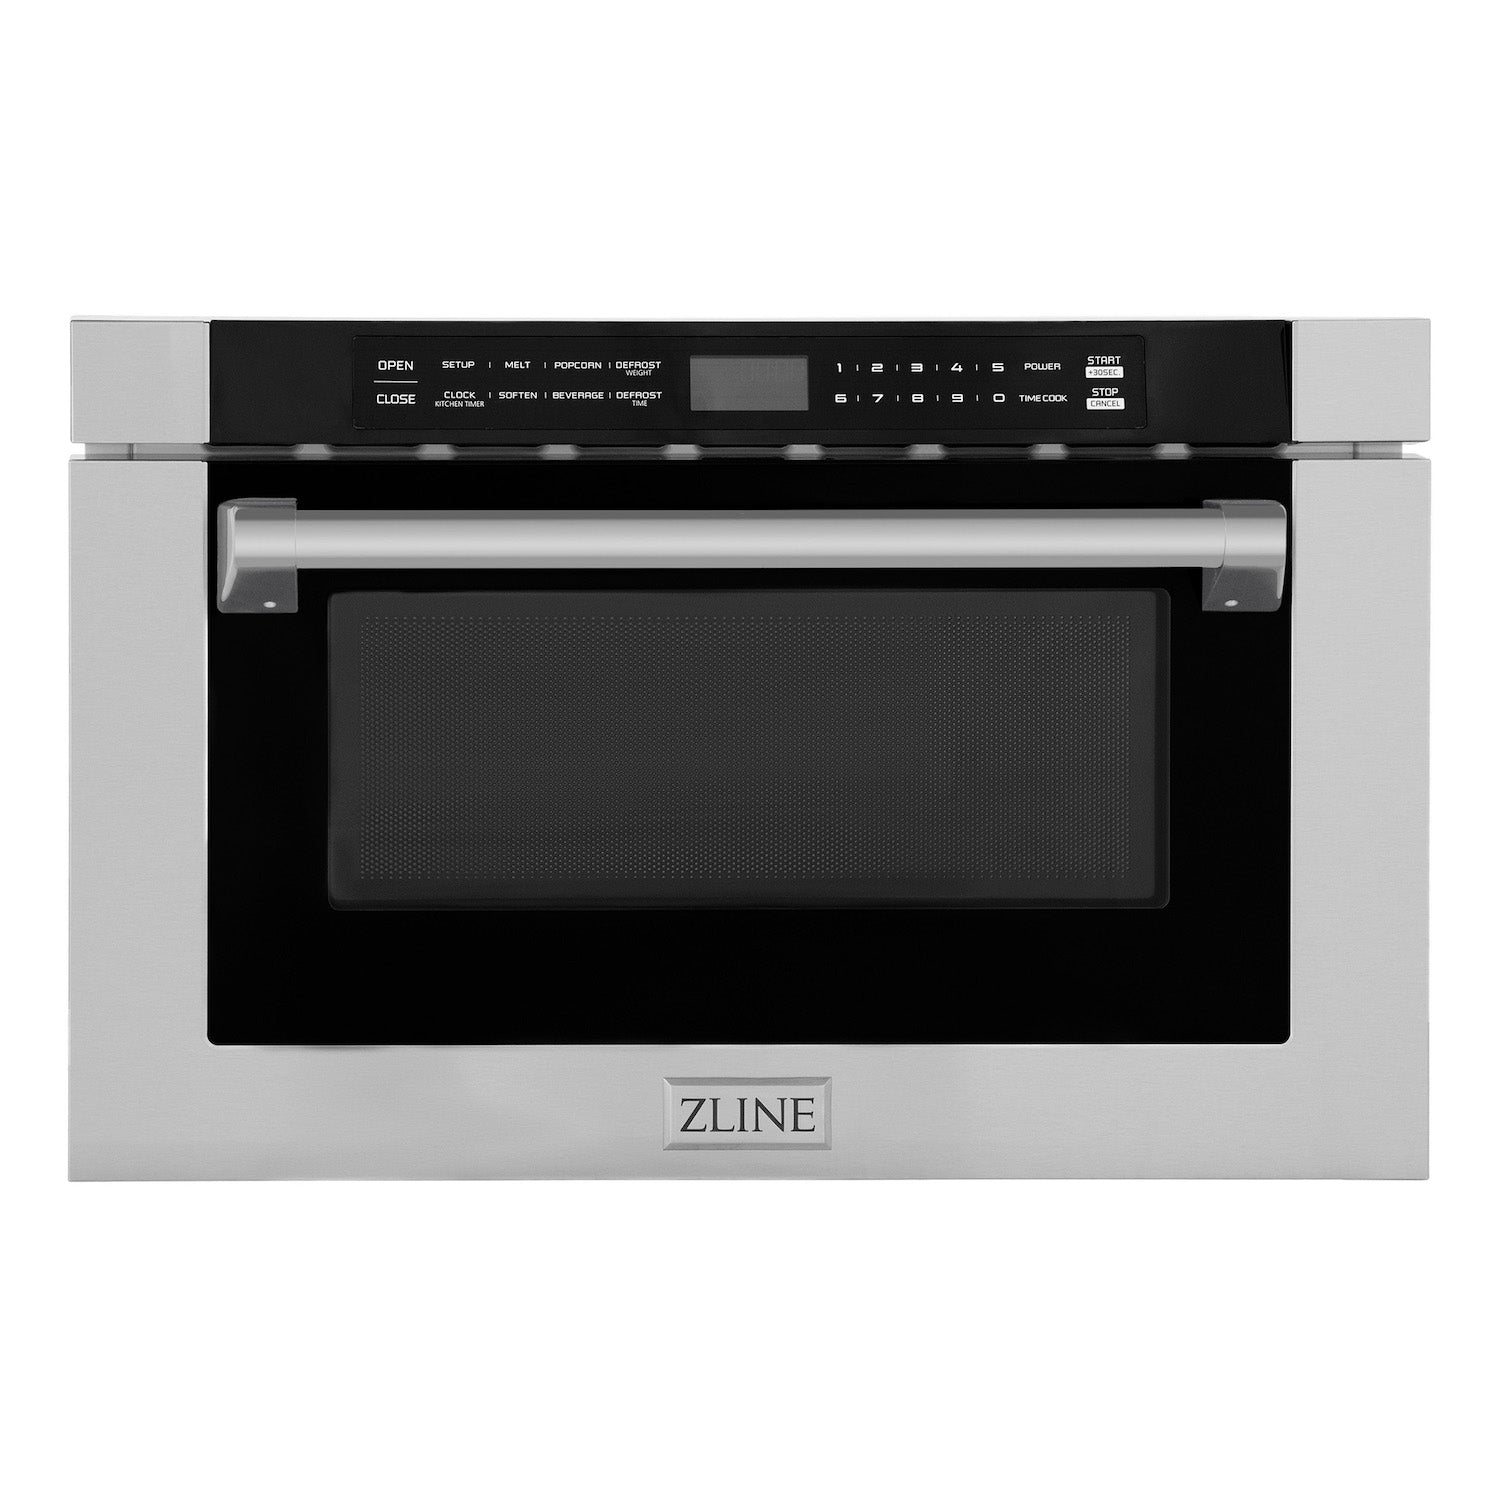 ZLINE 24 in. 1.2 cu. ft. Built-in Microwave Drawer in Stainless Steel with a Traditional Handle (MWD-1-H)